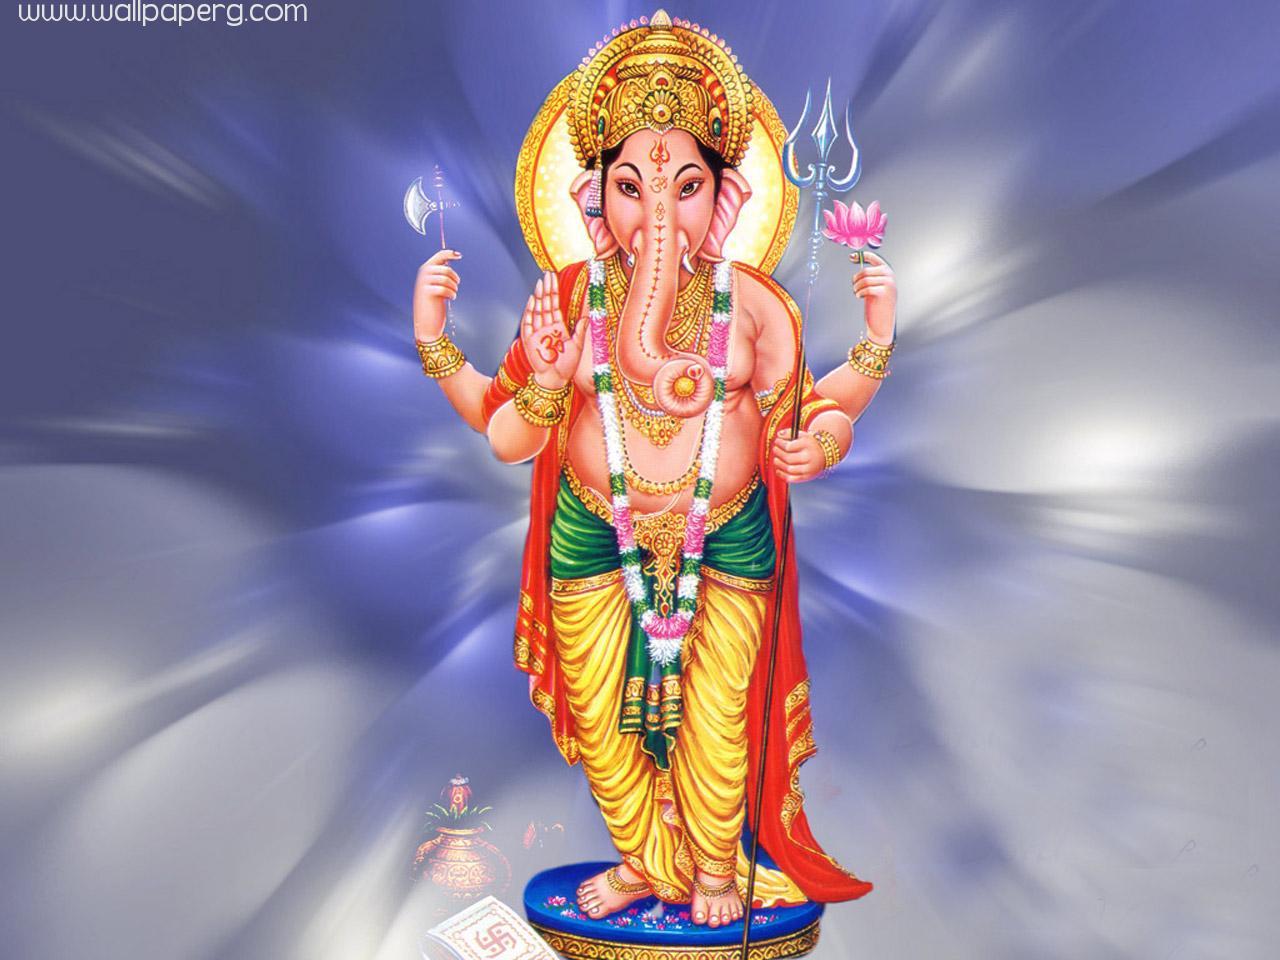 Download Ganesh darshan image - Ganesh chaturthi images for your mobile  cell phone